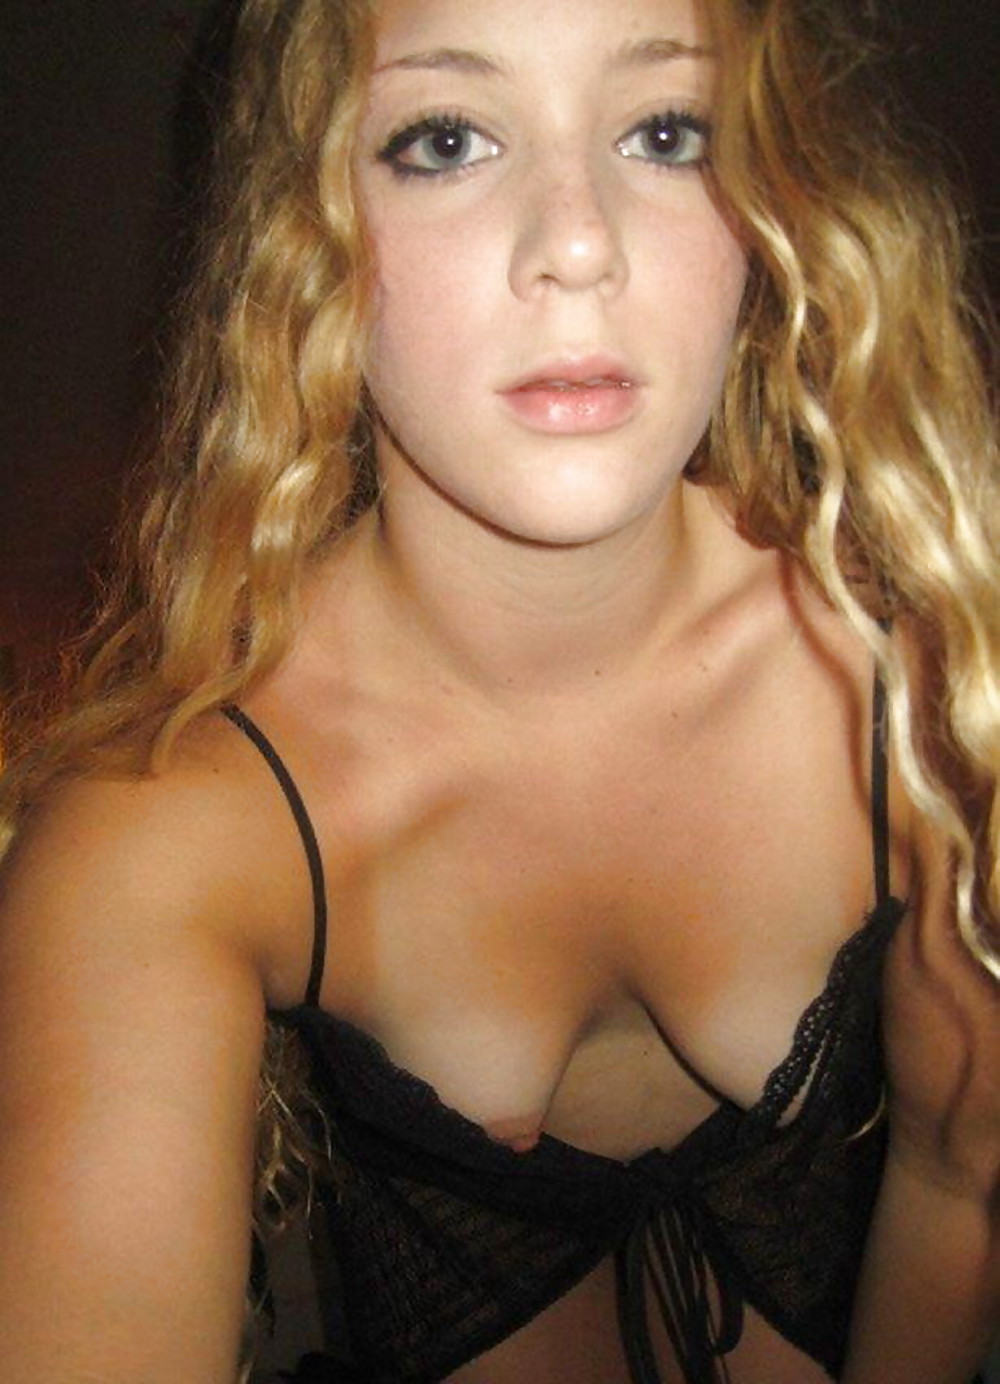 Sex Gallery Mixed Downblouse & Sheer & Cleavage Pictures!